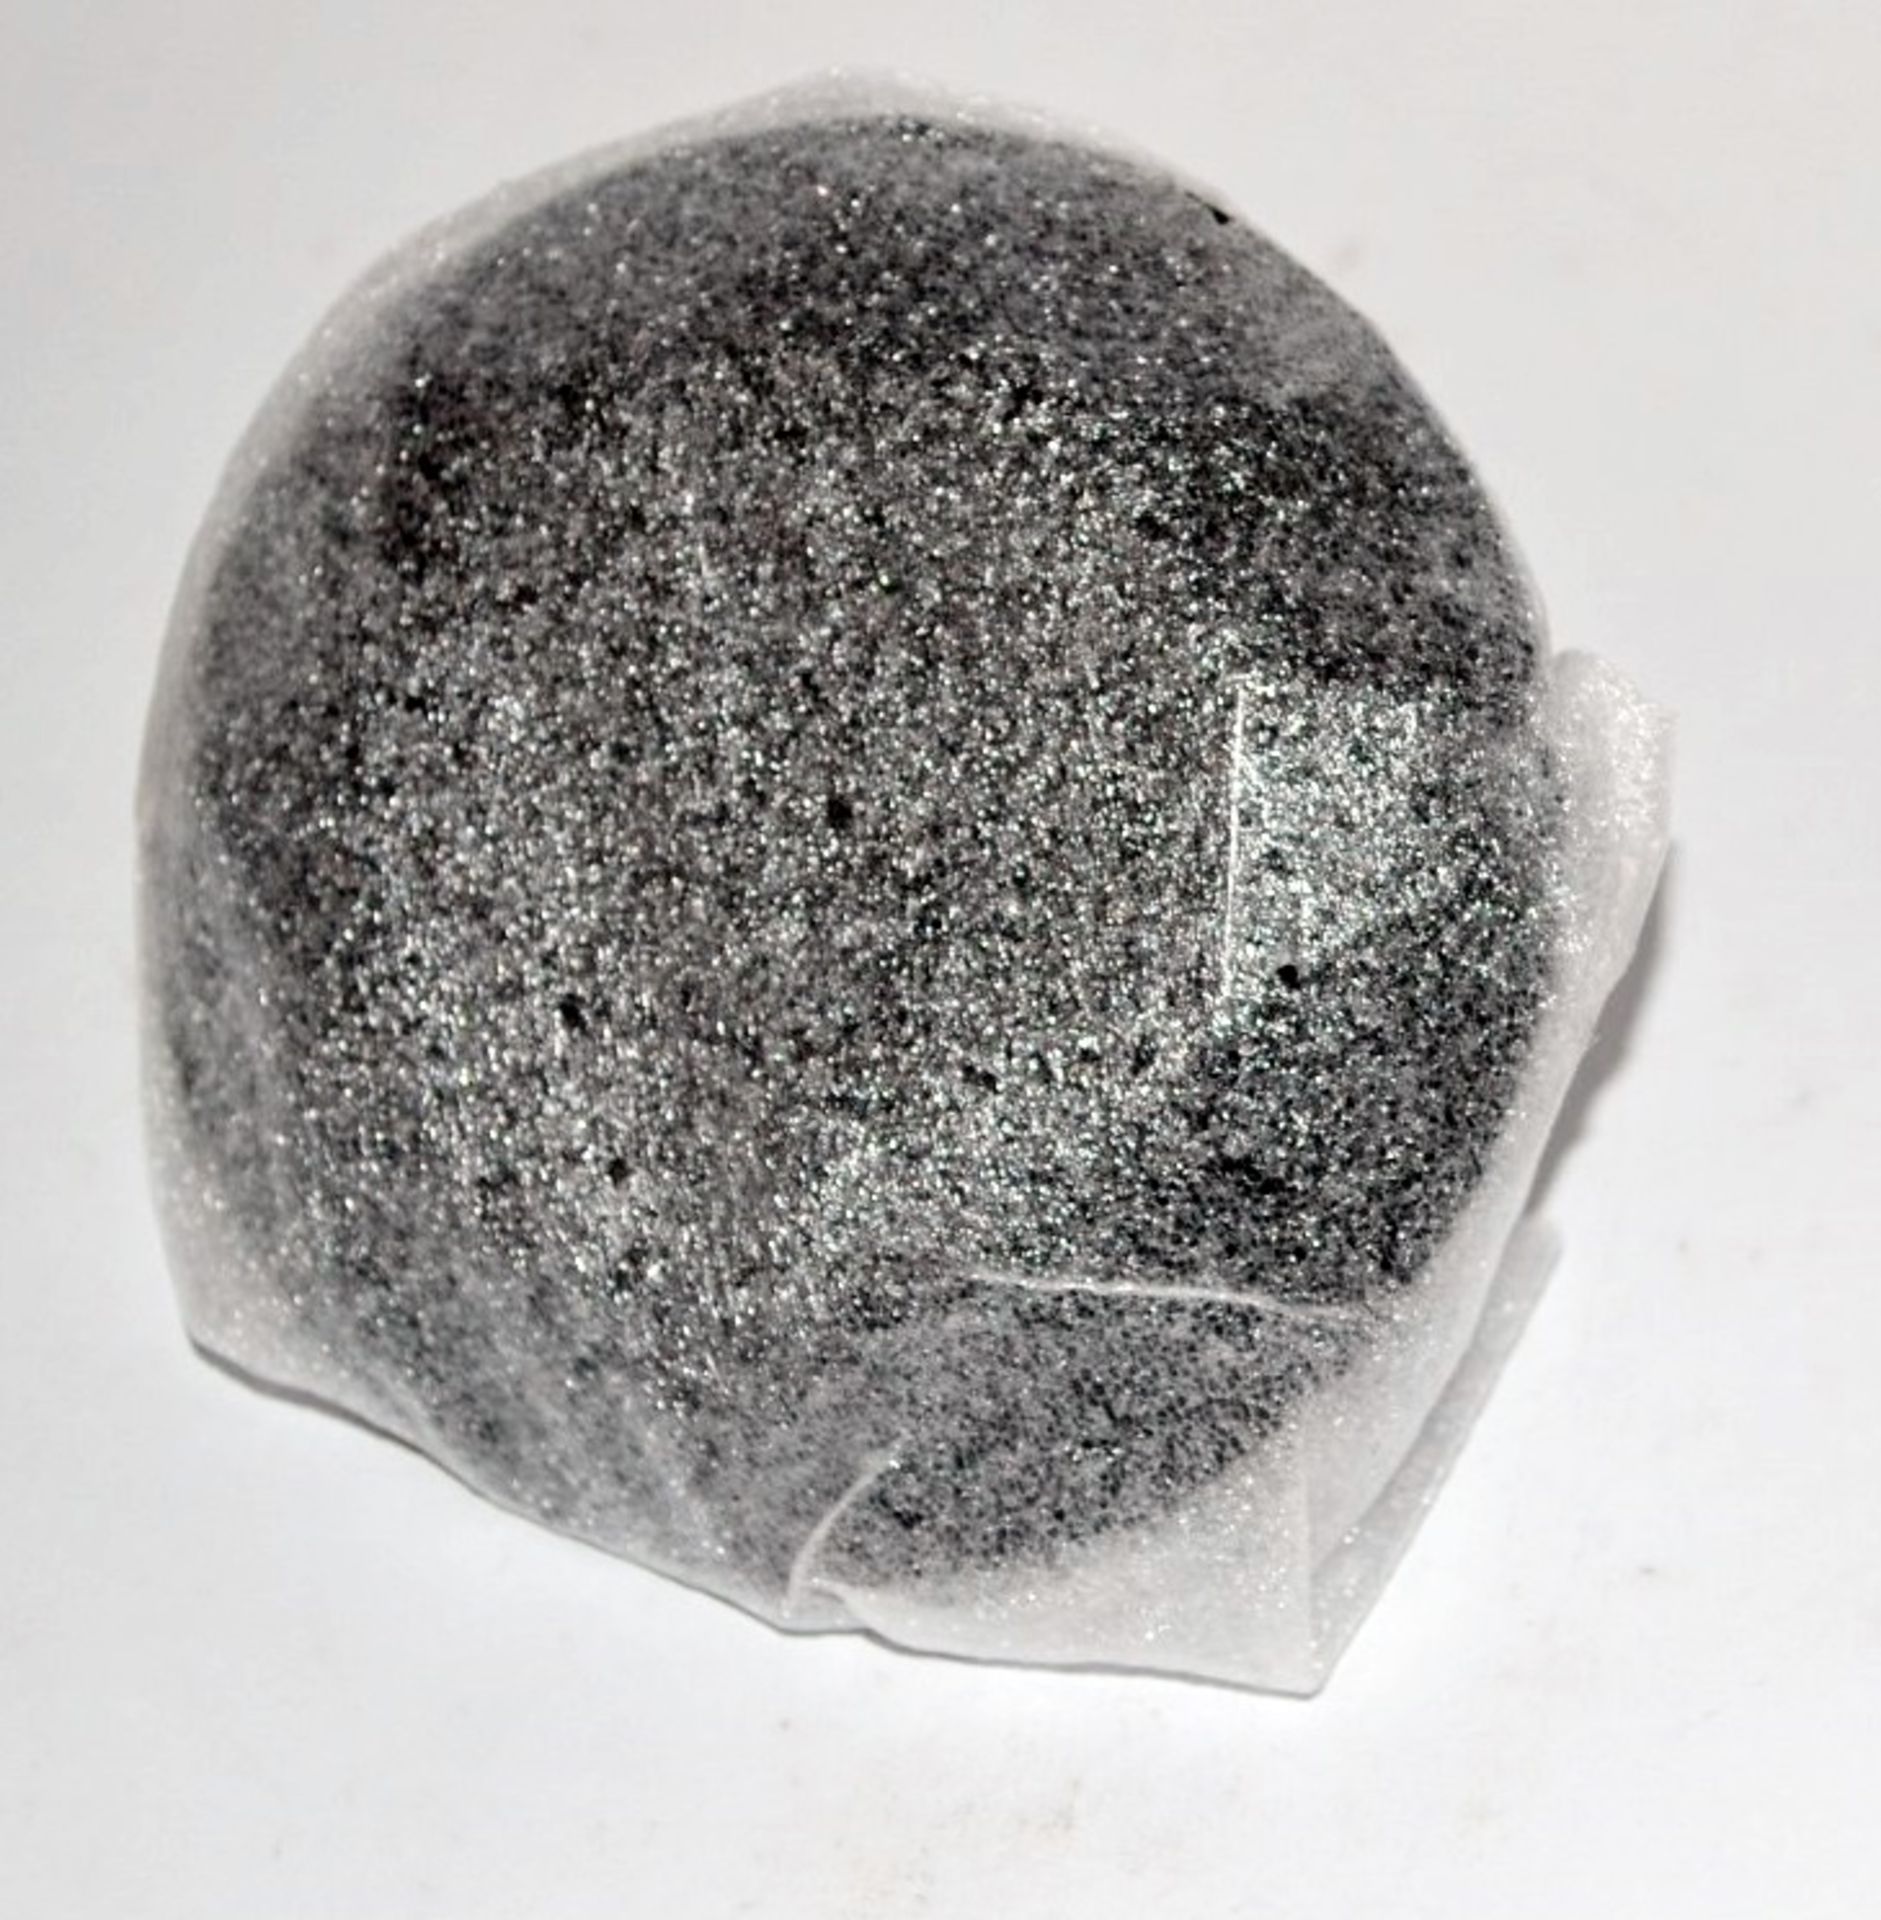 10 x ICE London Diamond Shaped Crystal Paperweights - Colour: Black - 100mm In Diameter - New & - Image 3 of 4